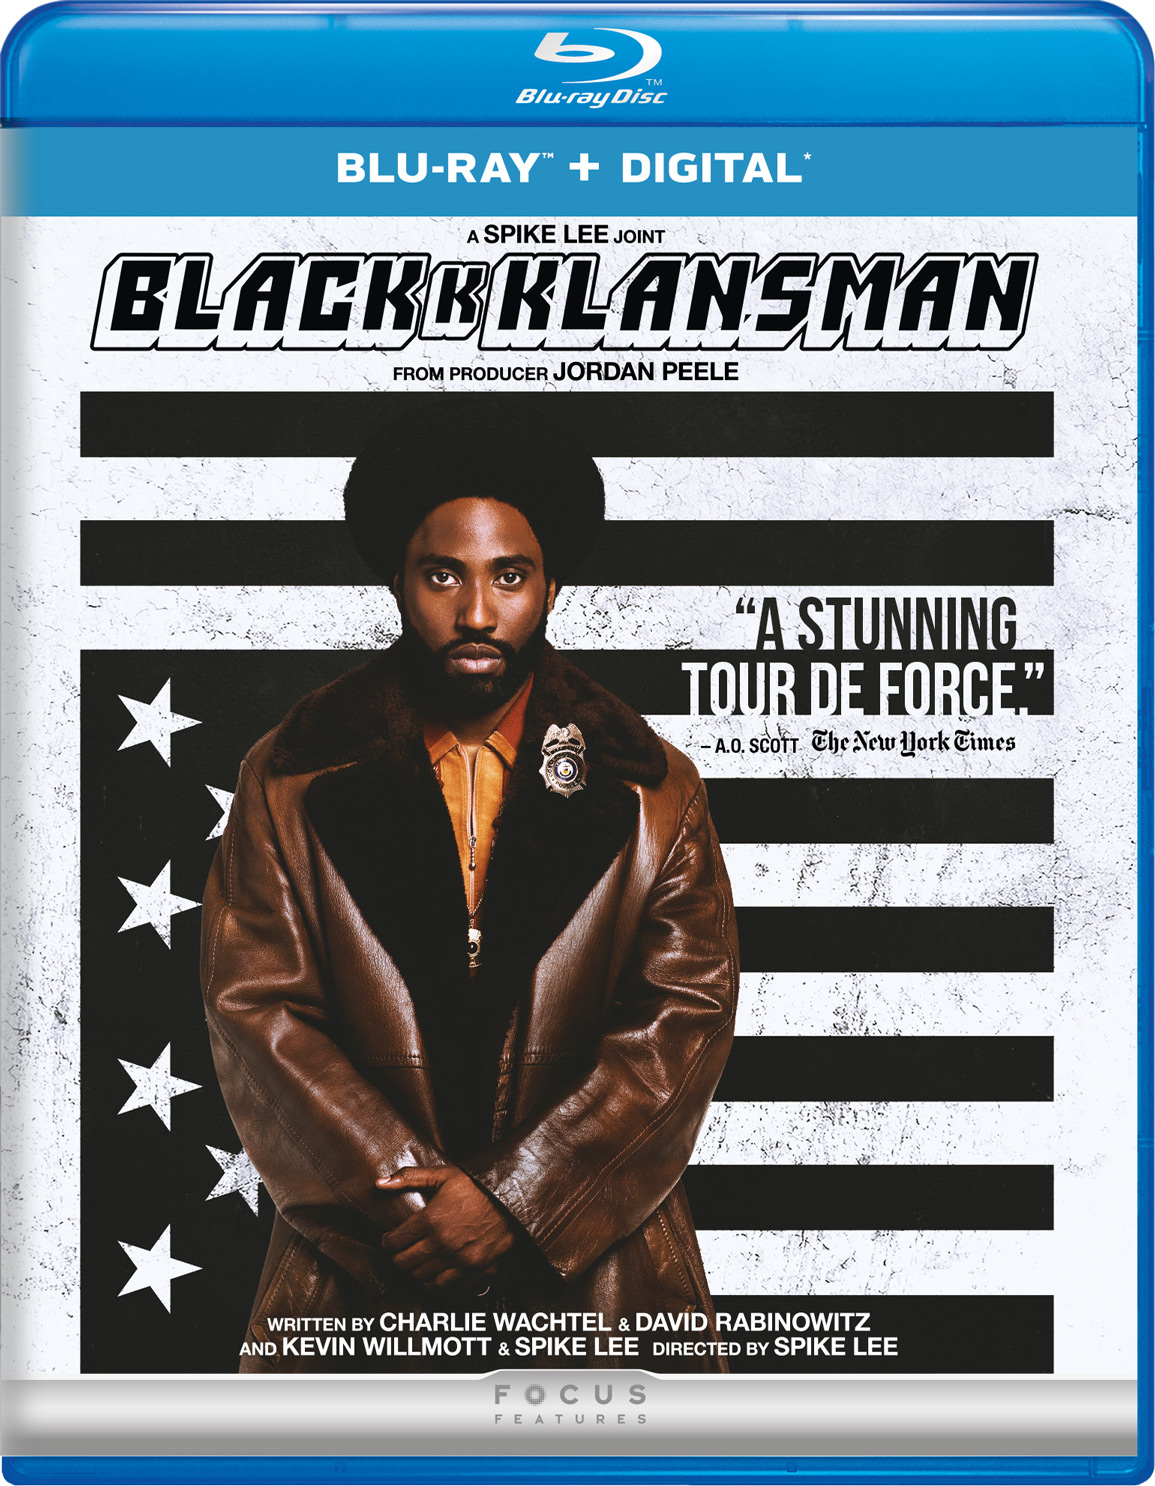 BKAKkKLANSMAN Blu-Ray Combo Pack cover (Universal Pictures Home Entertainment)